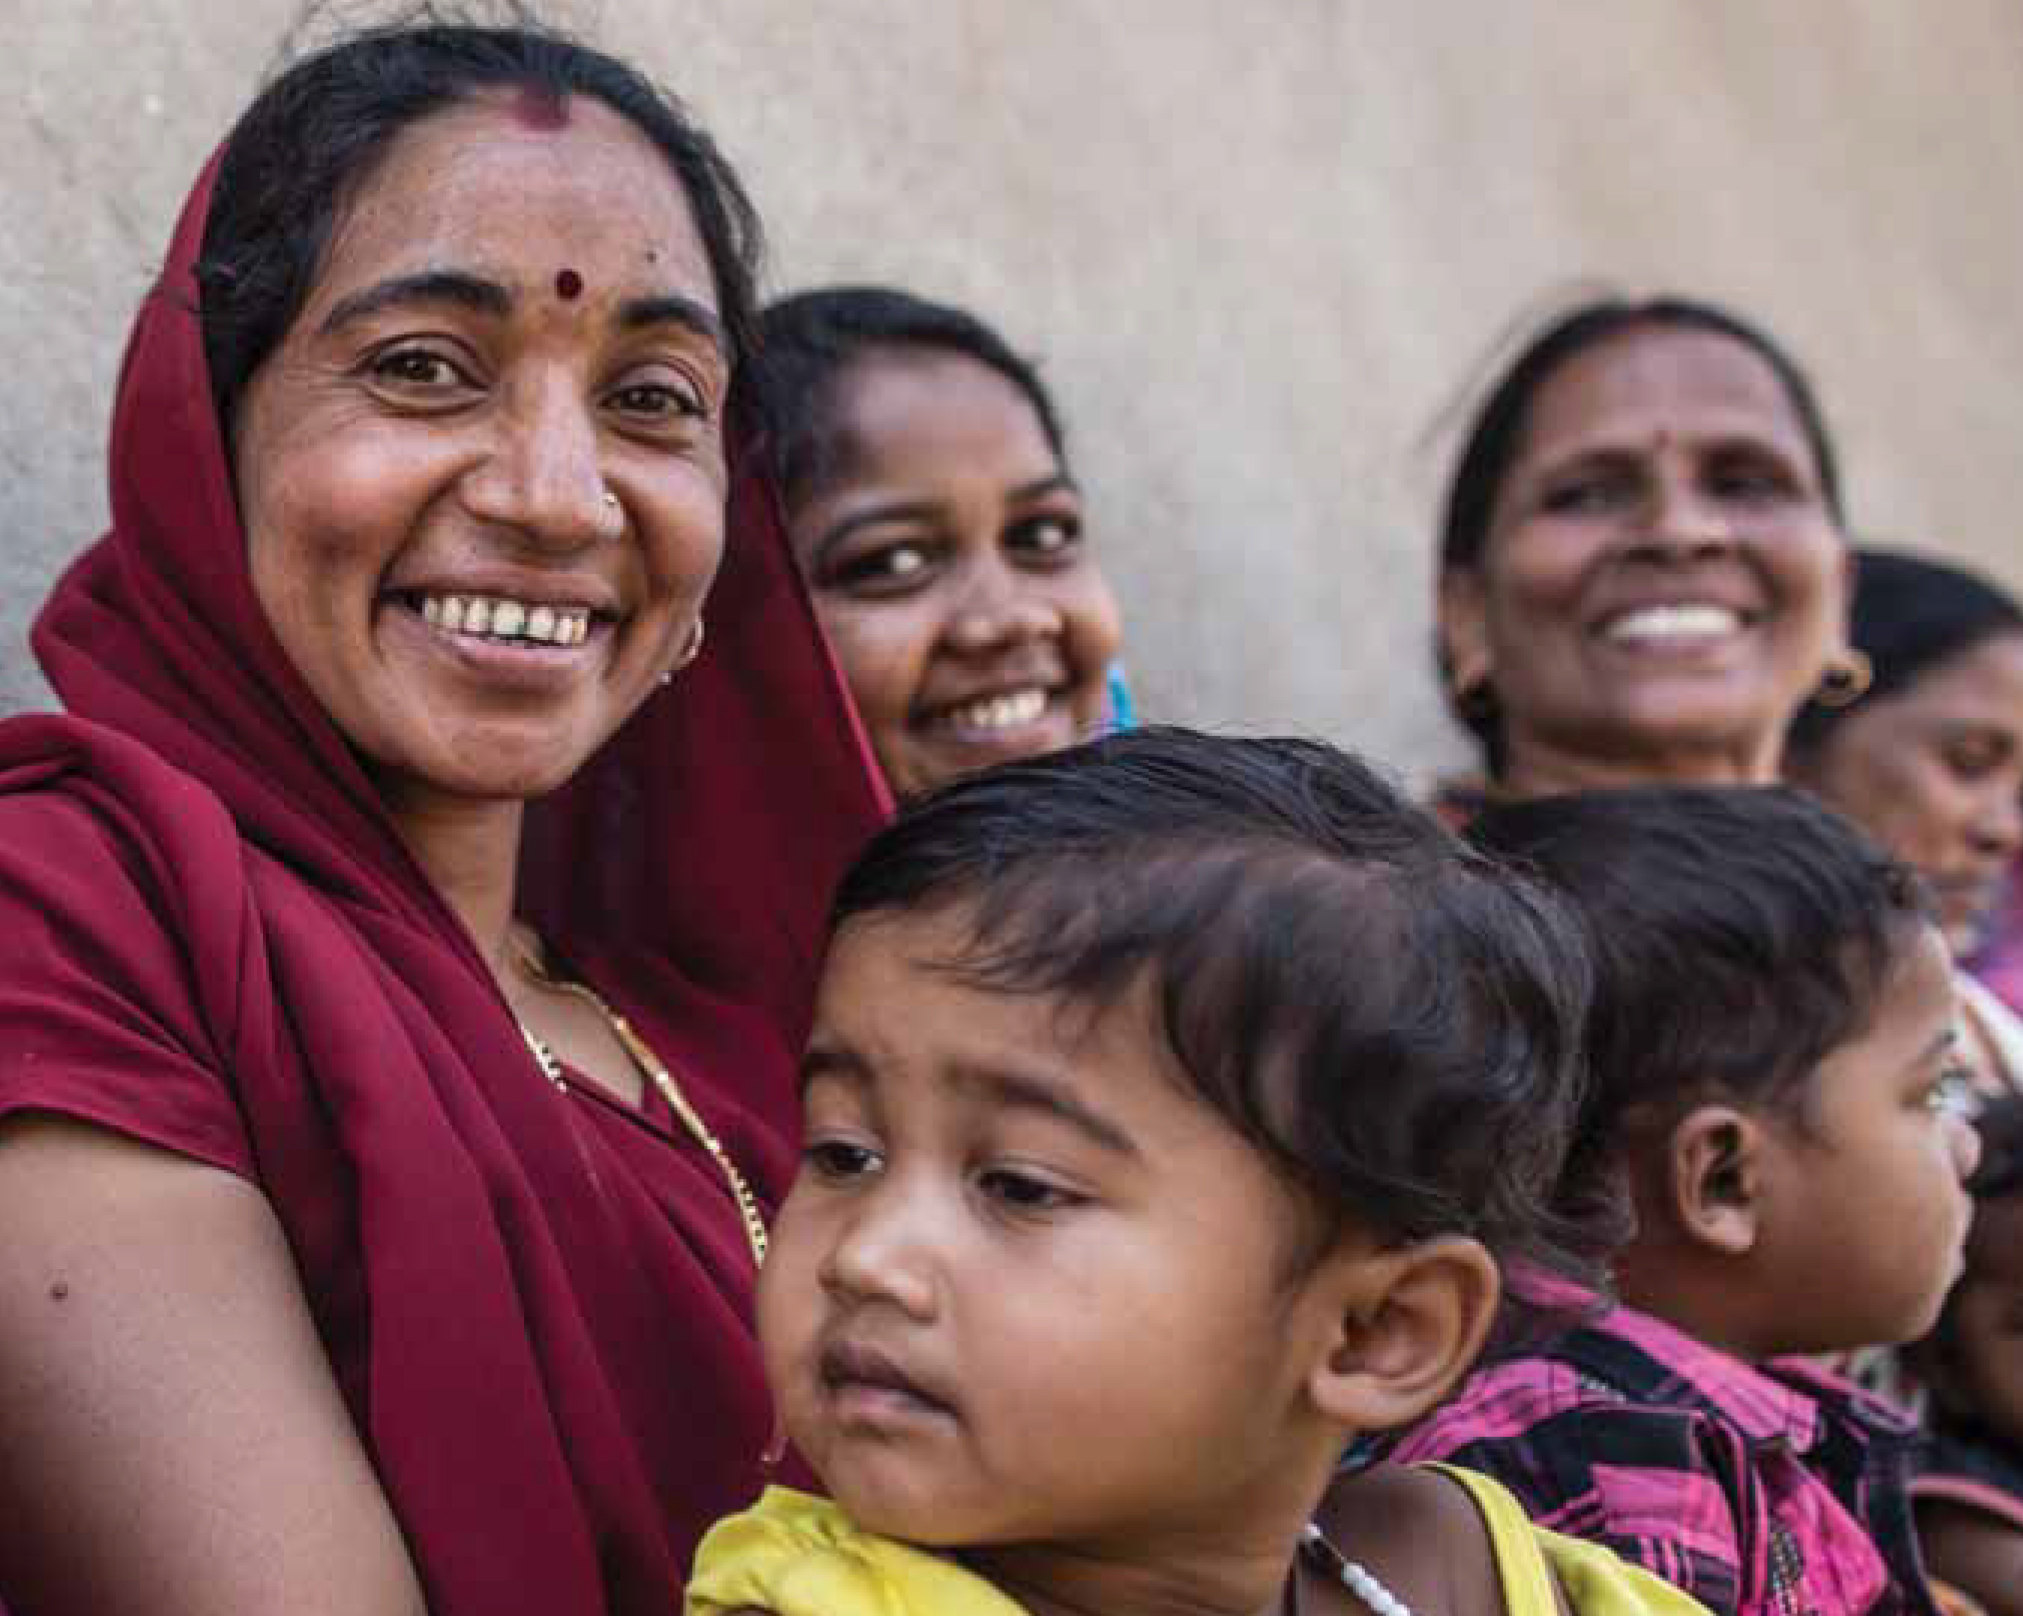 Anemia Mukt Bharat Aims To Reach 450 Million People By 2022 Medibulletin 0493